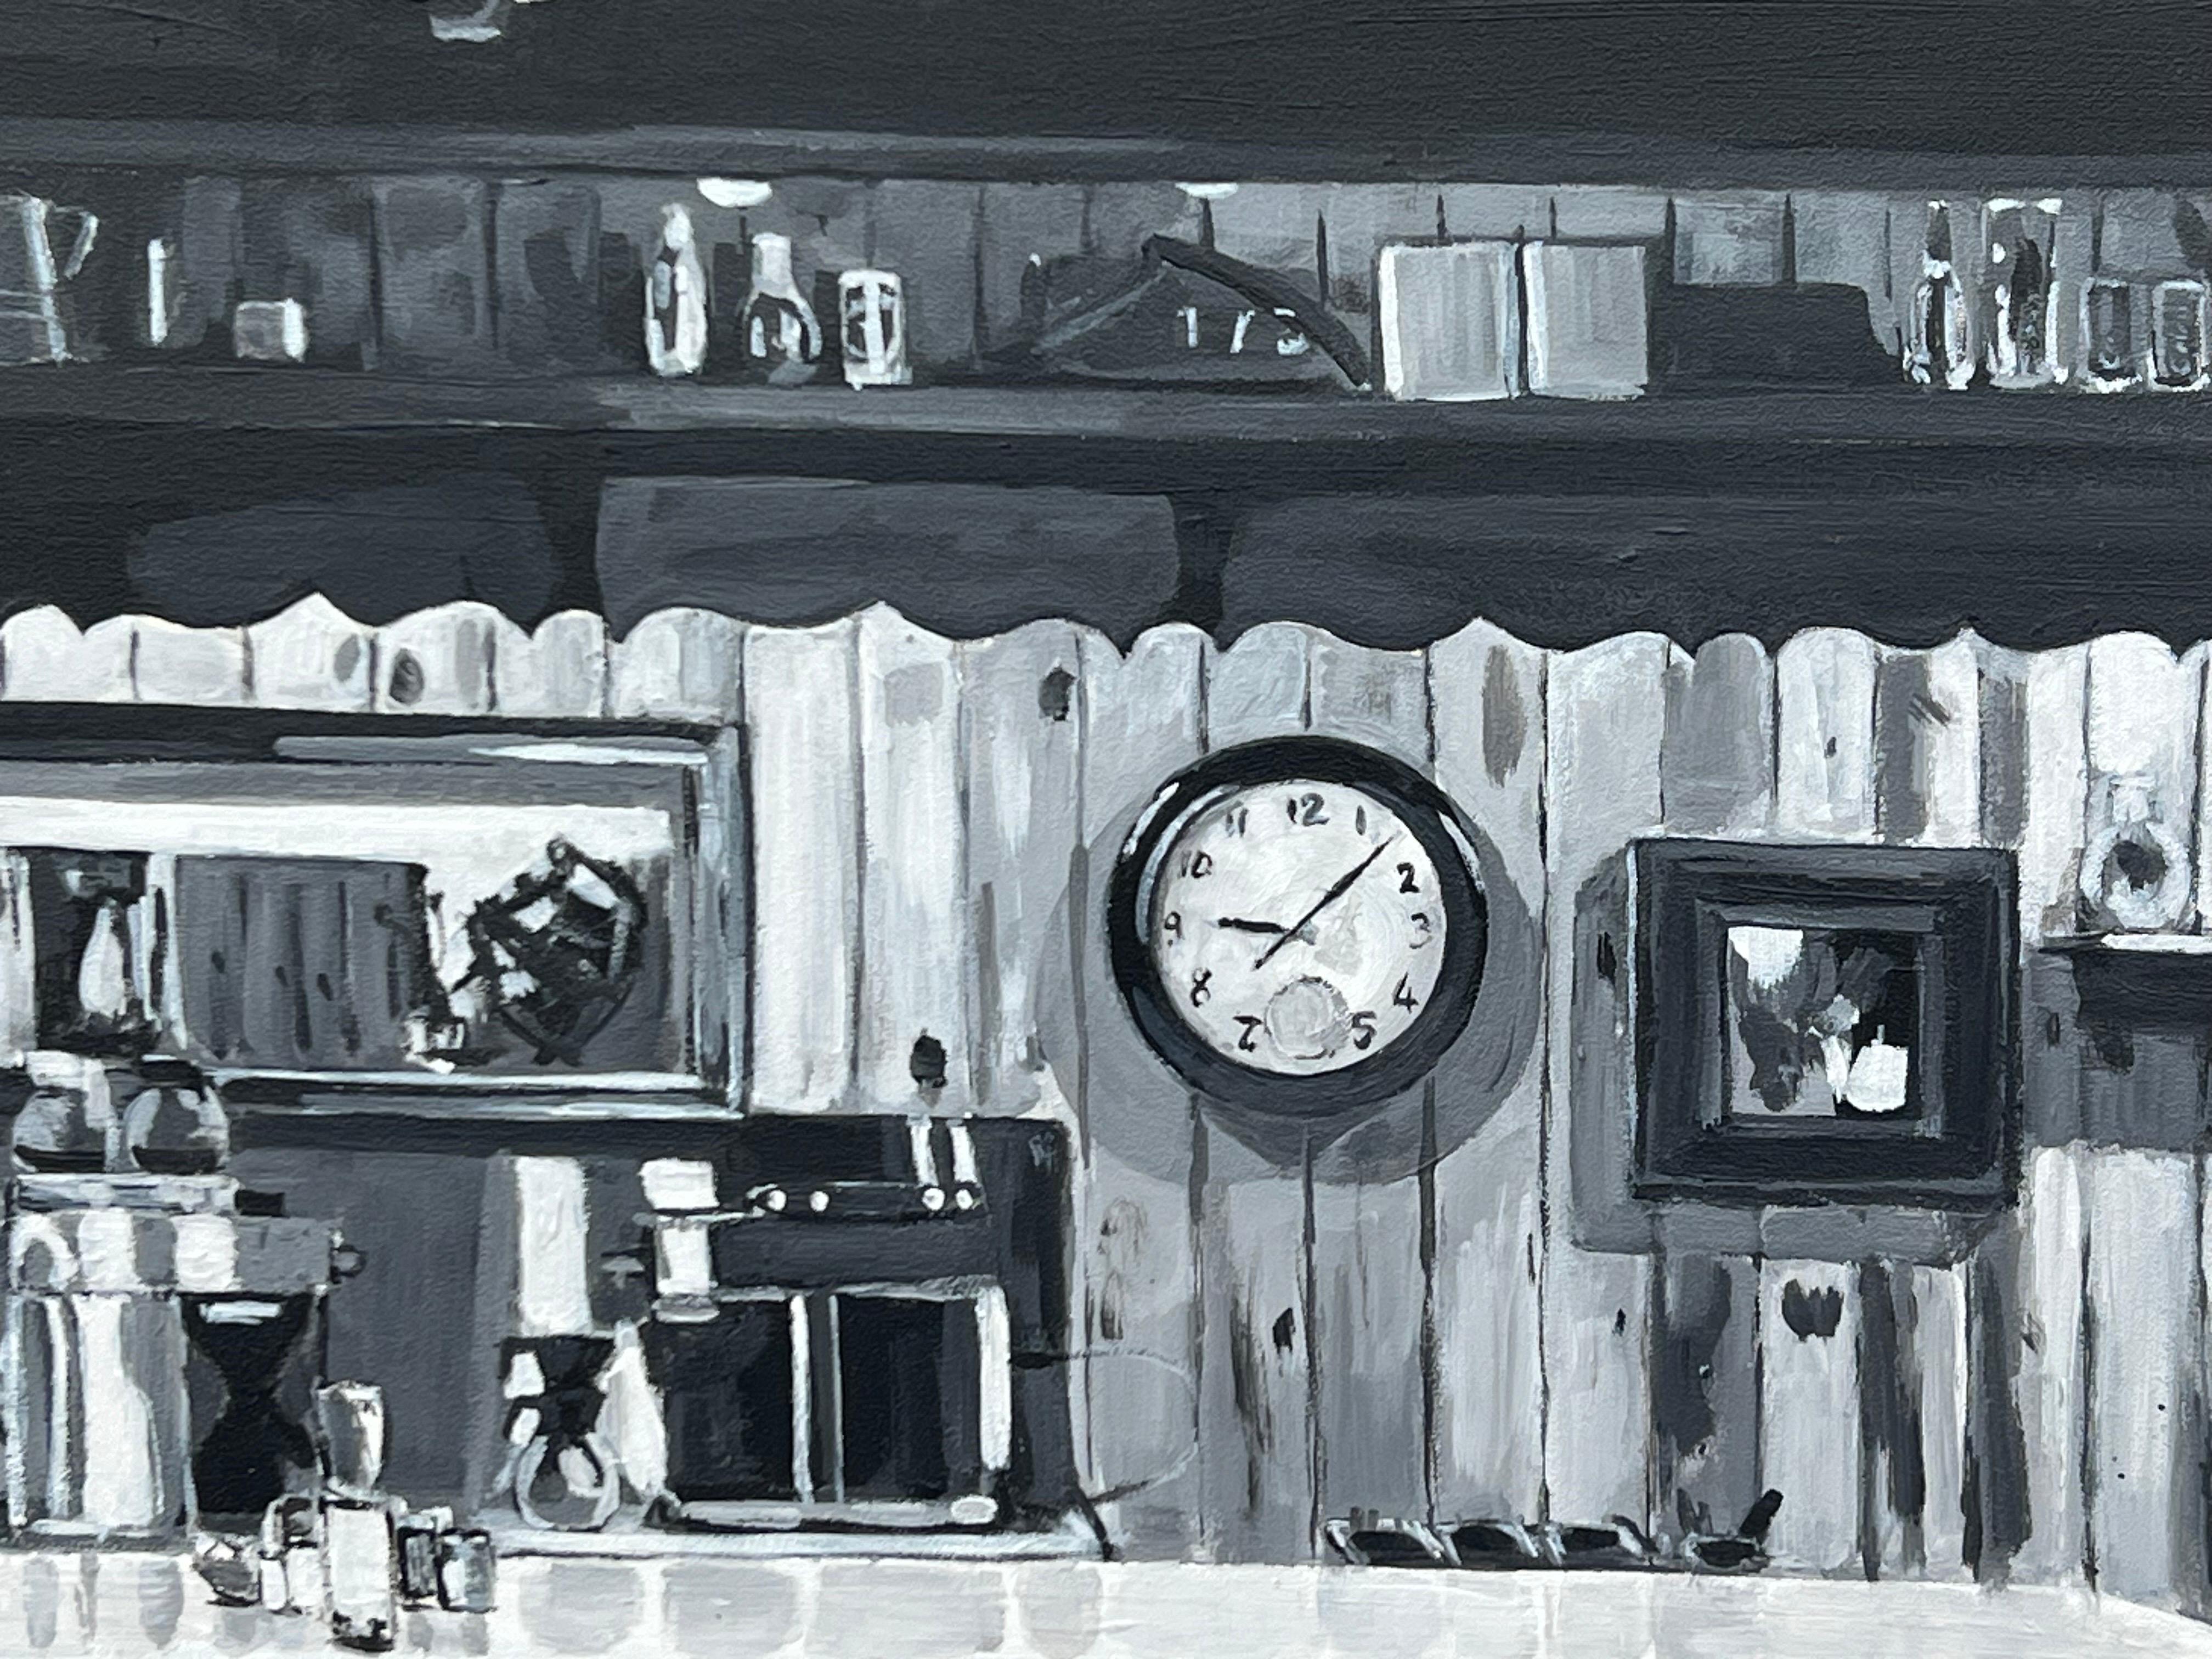 American Cowboy Diner Painting by British Contemporary Artist in Black & White 4